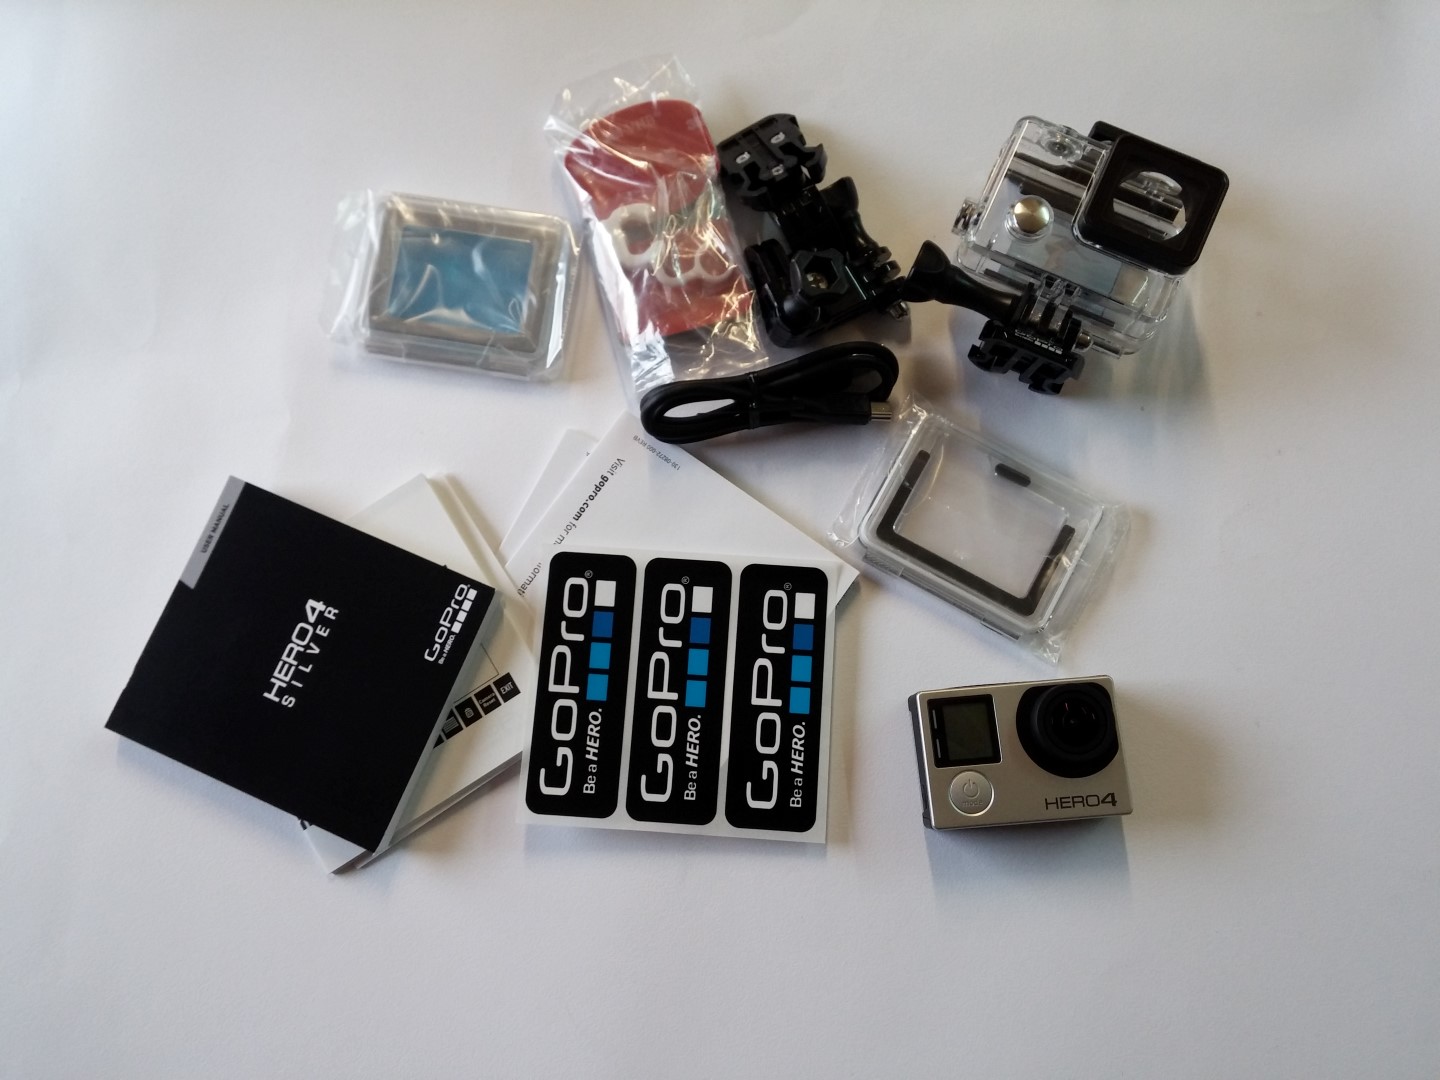 GoPro Hero 4 Silver Edition unboxing & hands-on